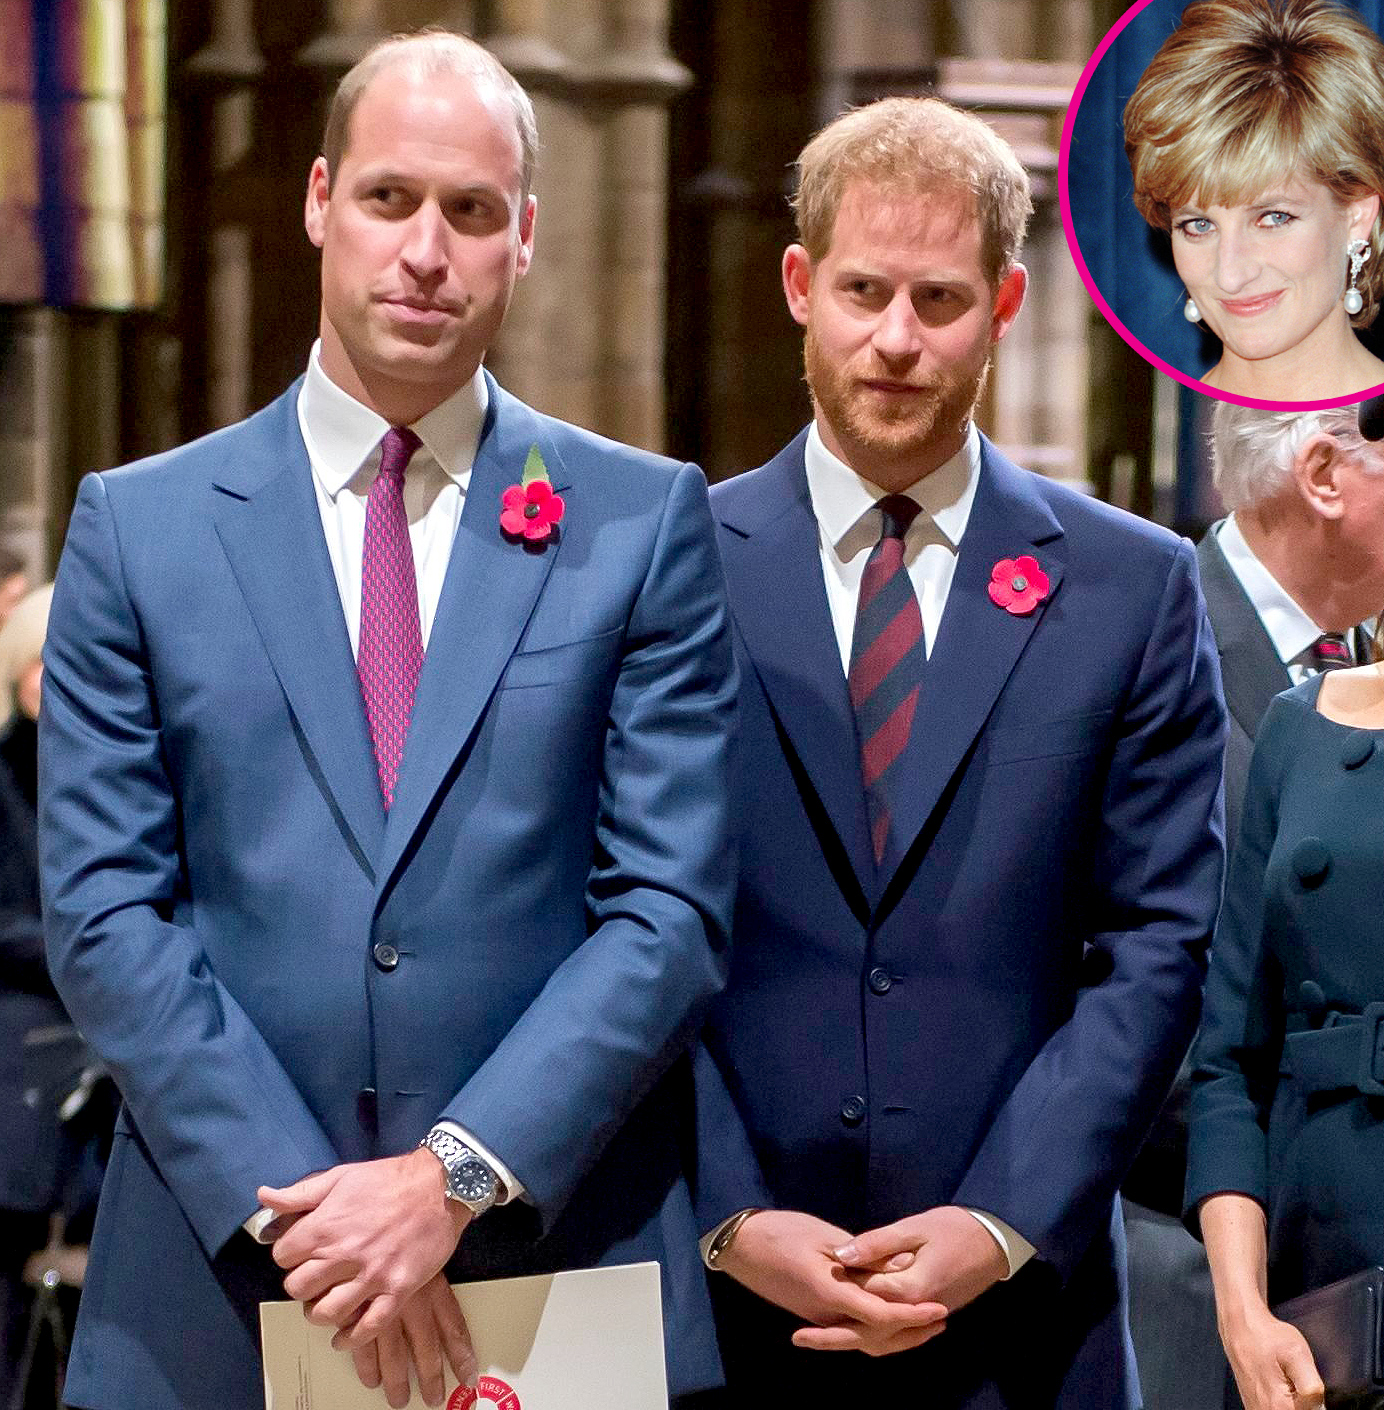 Lady Diana Porn - Prince William, Harry Issue Joint Statement to Honor Mom Princess Diana